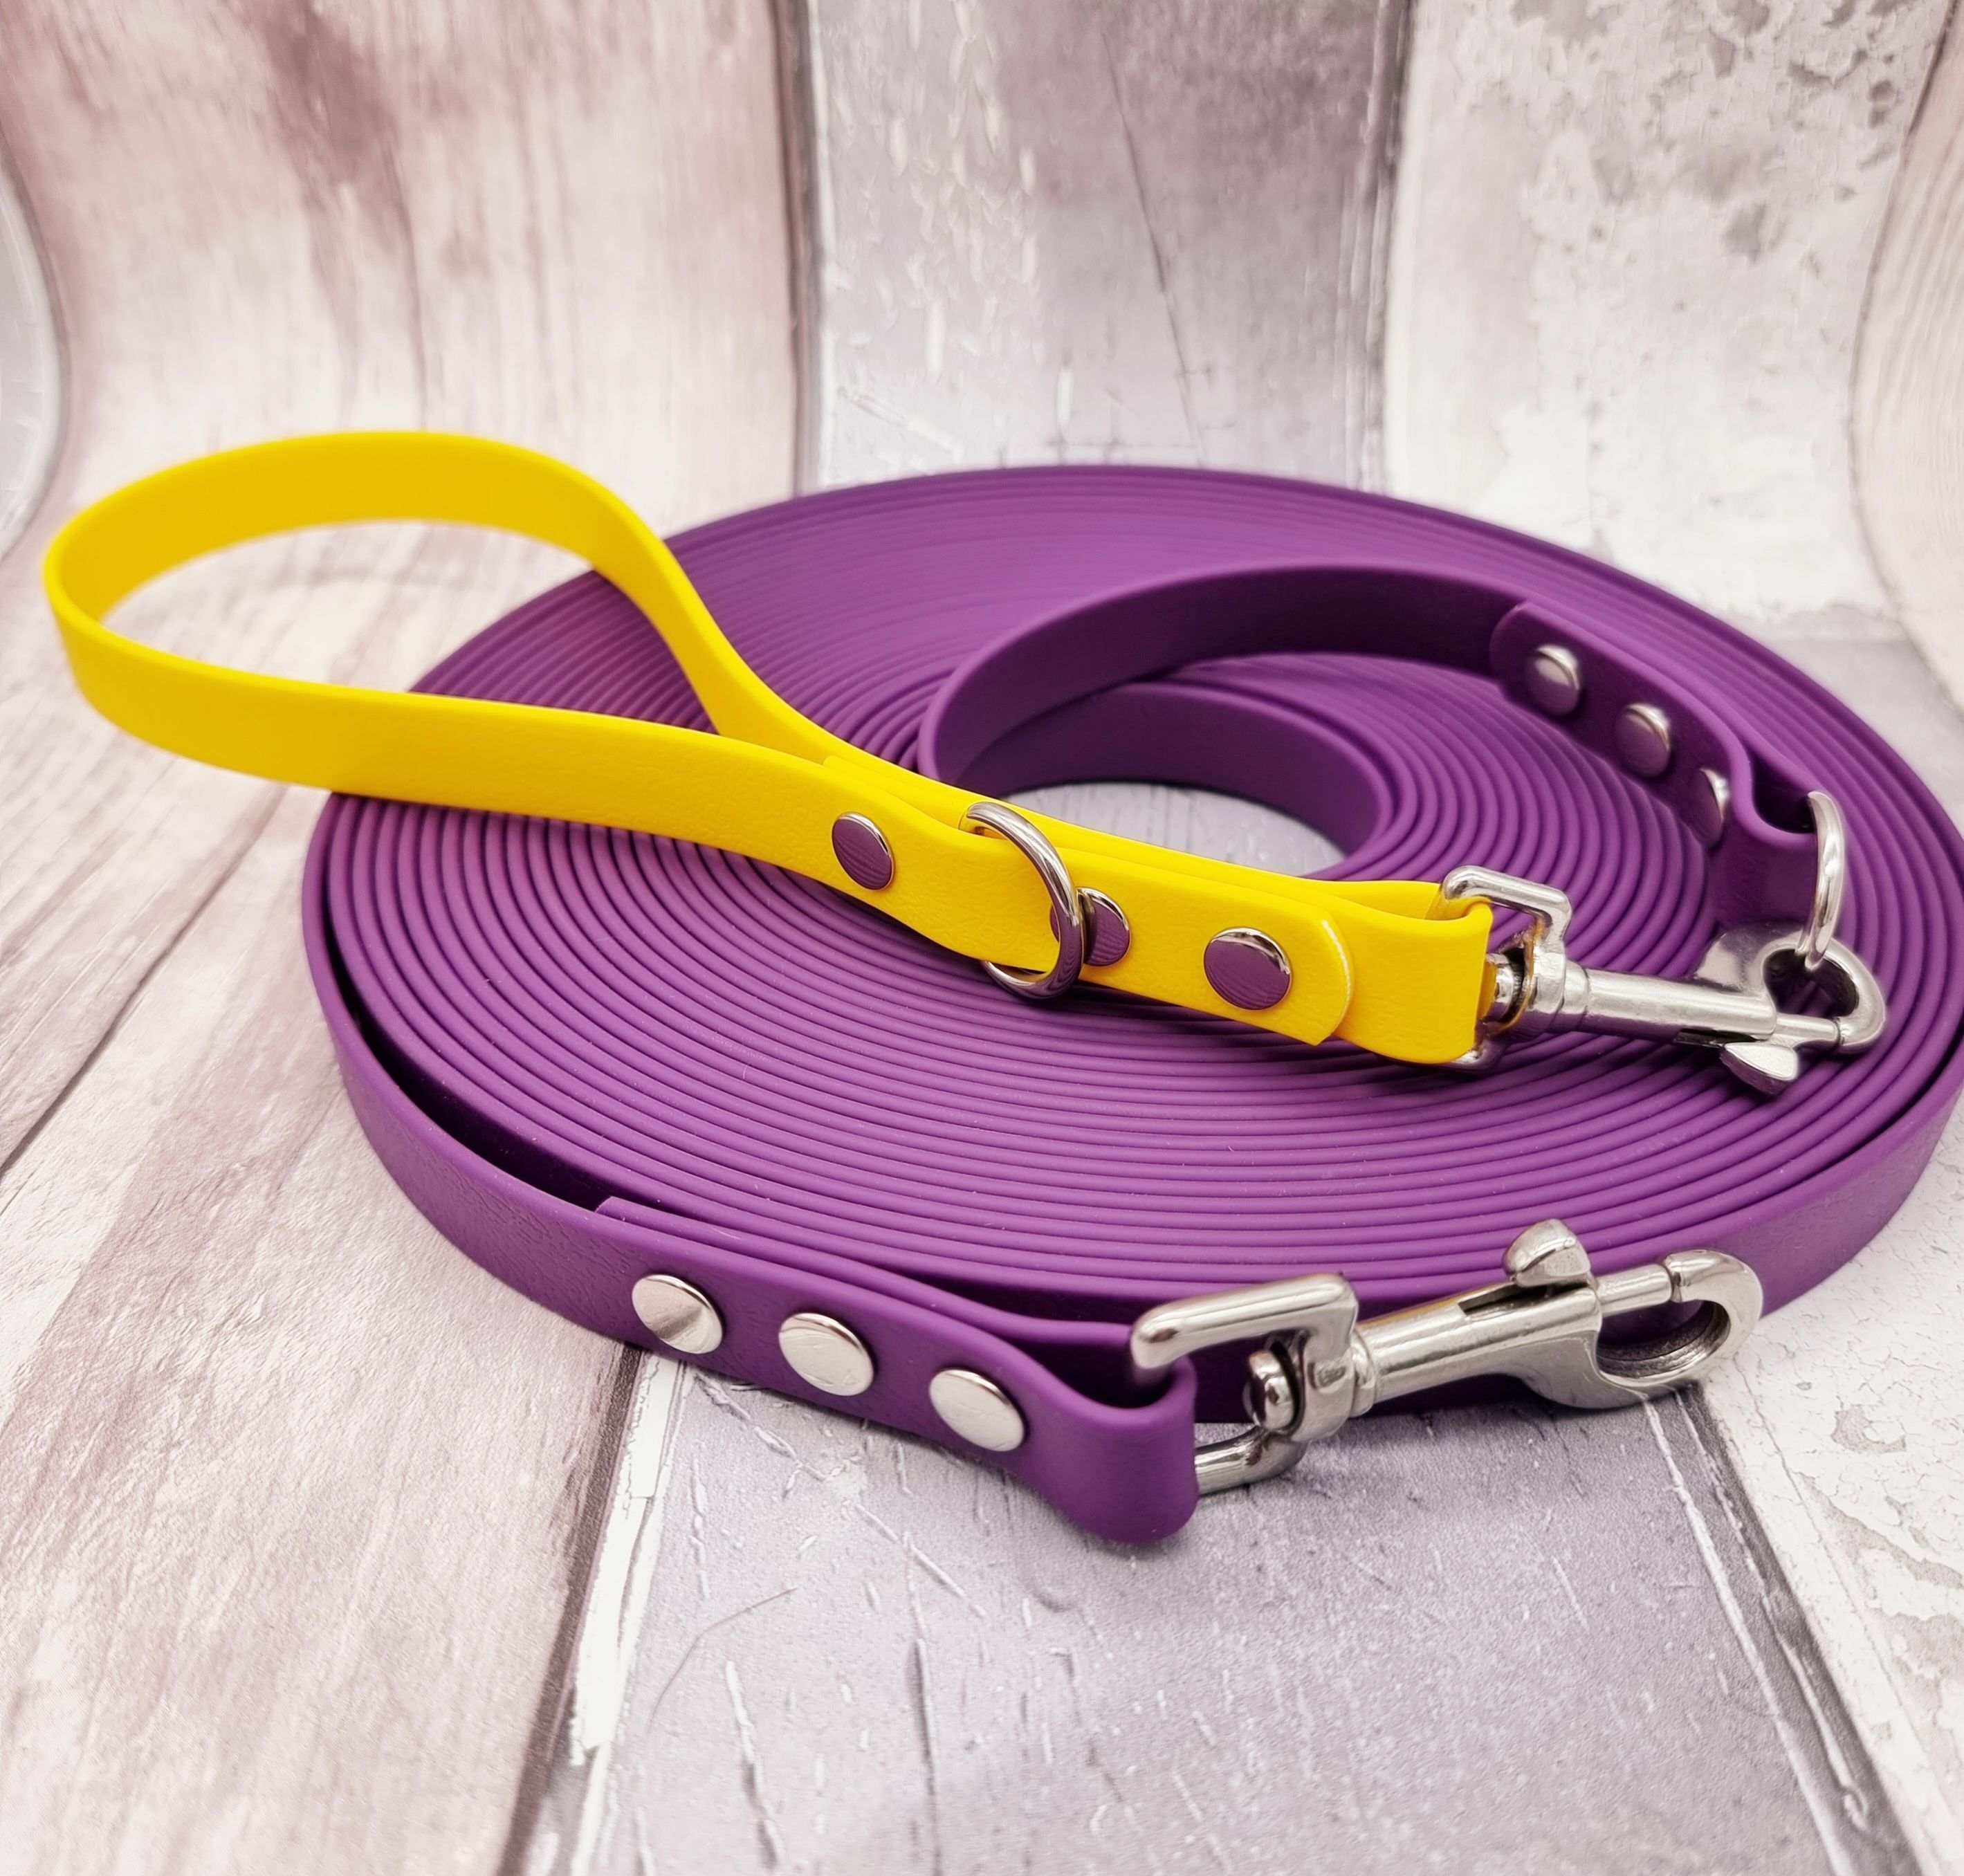 Trinkety Paws - Waterproof Dog Long Line with detachable Handle